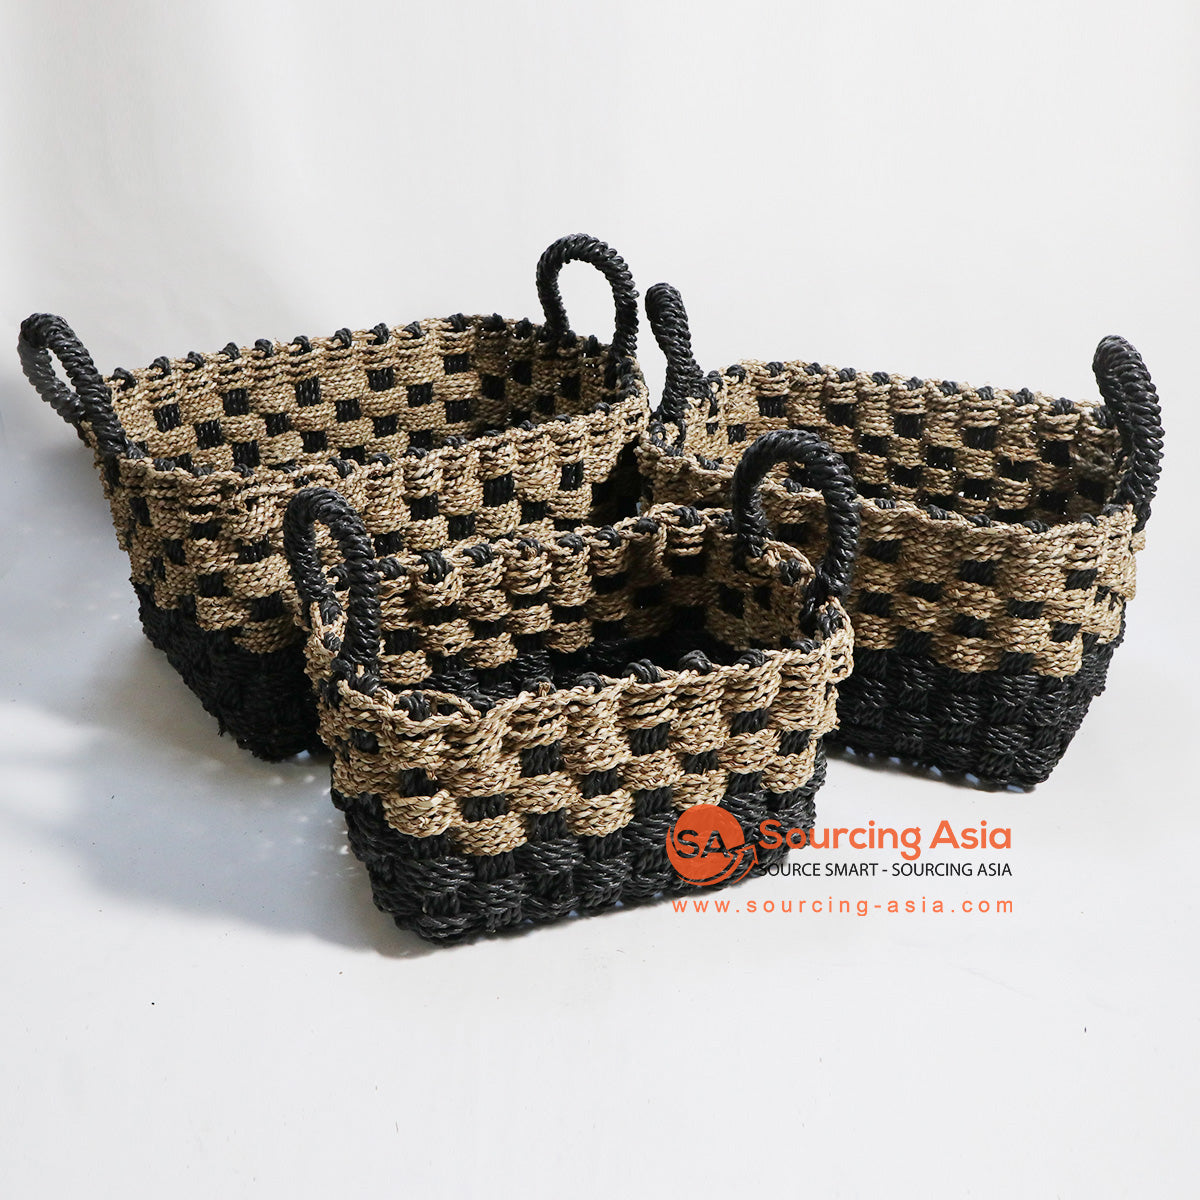 HBSC136 SET OF THREE BLACK AND NATURAL SEAGRASS BASKETS